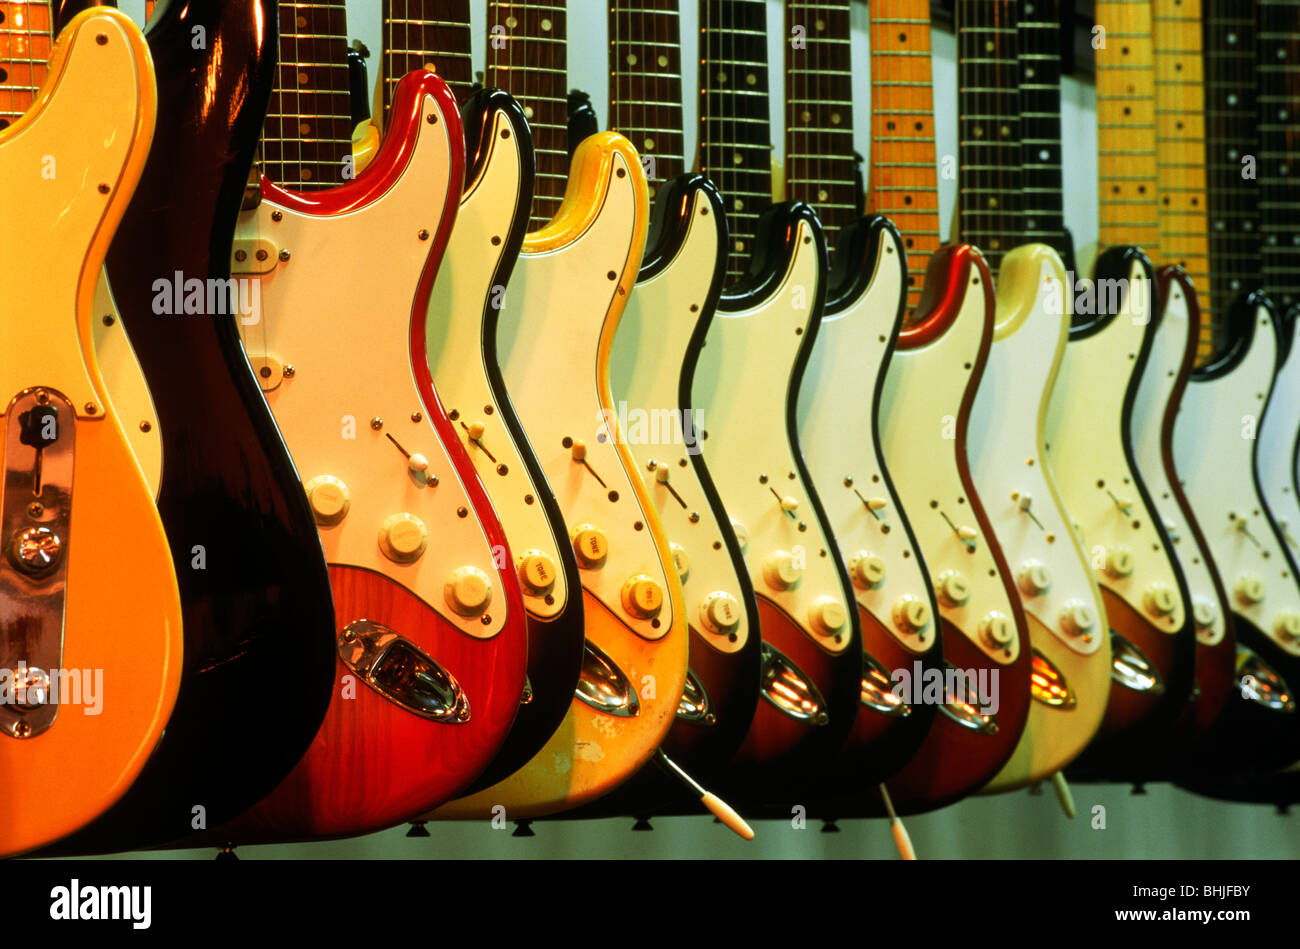 Guitars In Music Shop High Resolution Stock Photography and Images - Alamy